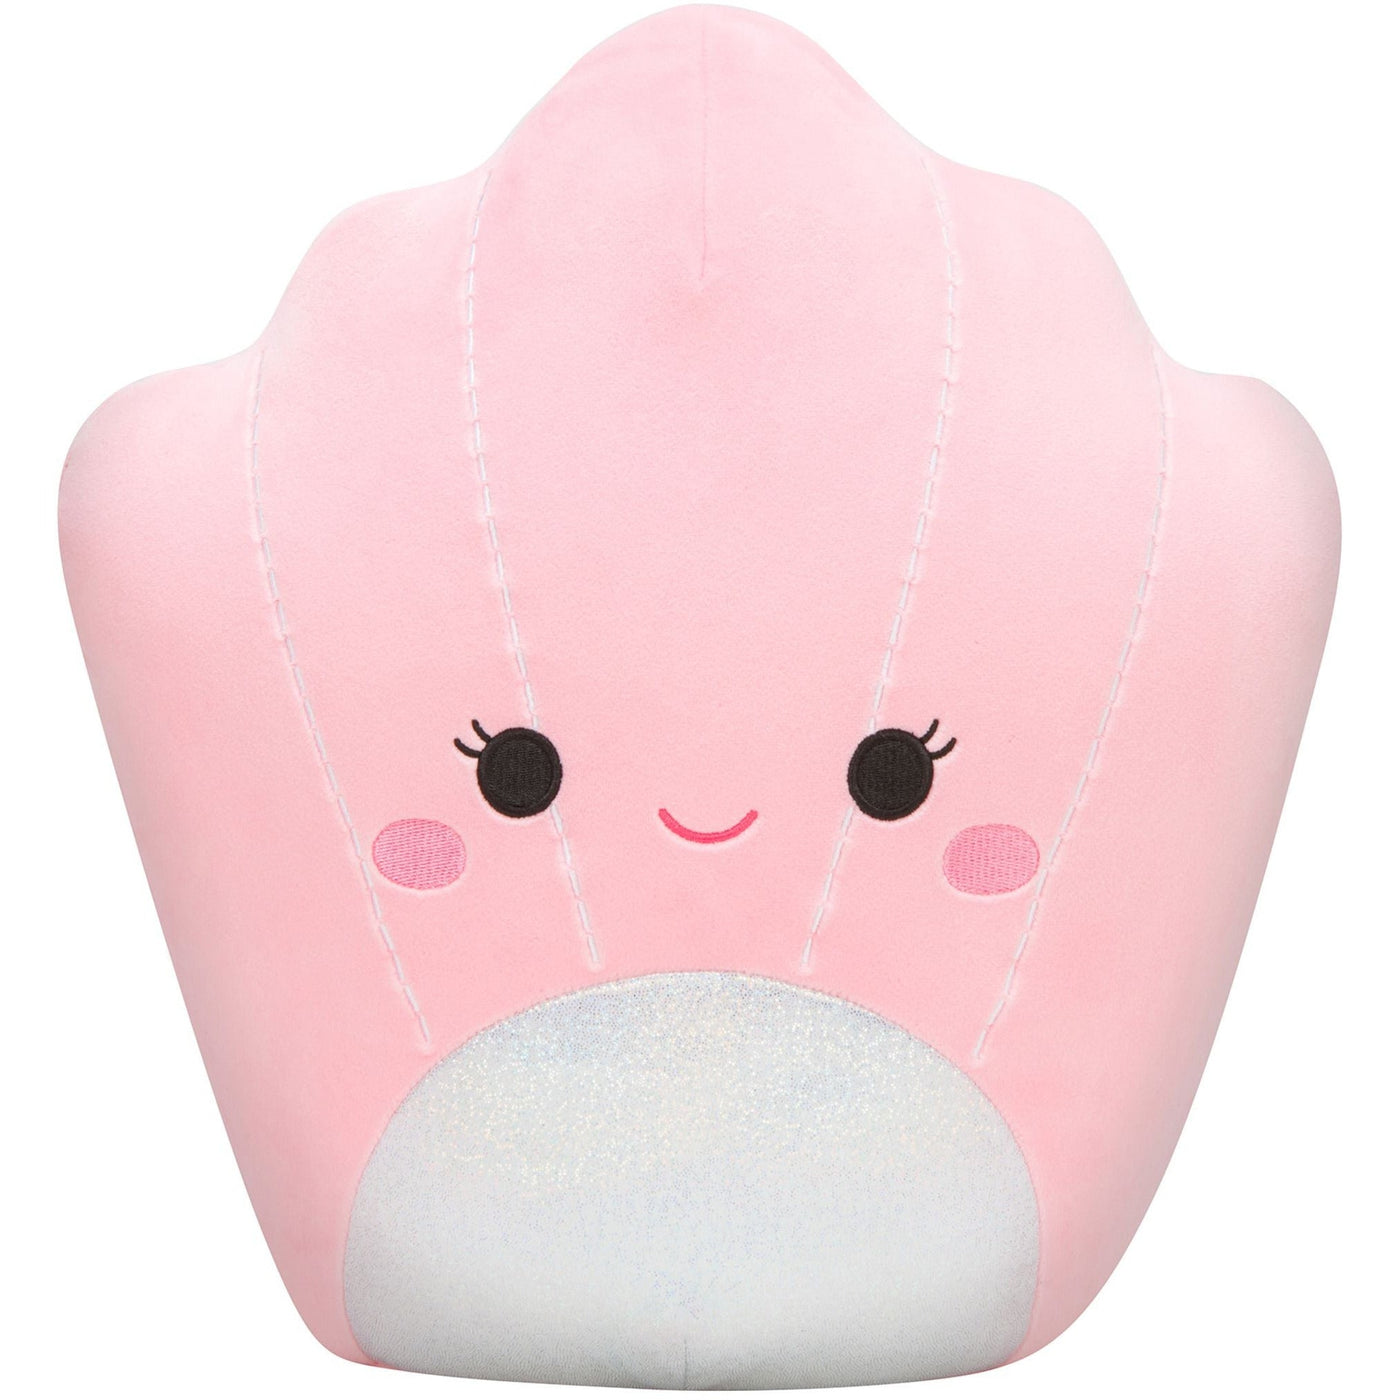 Squishmallows - 12in Plush Soft Toy - Sealife-Squishmallows-Squishmallows-Aicha the Shell-Yes Bebe